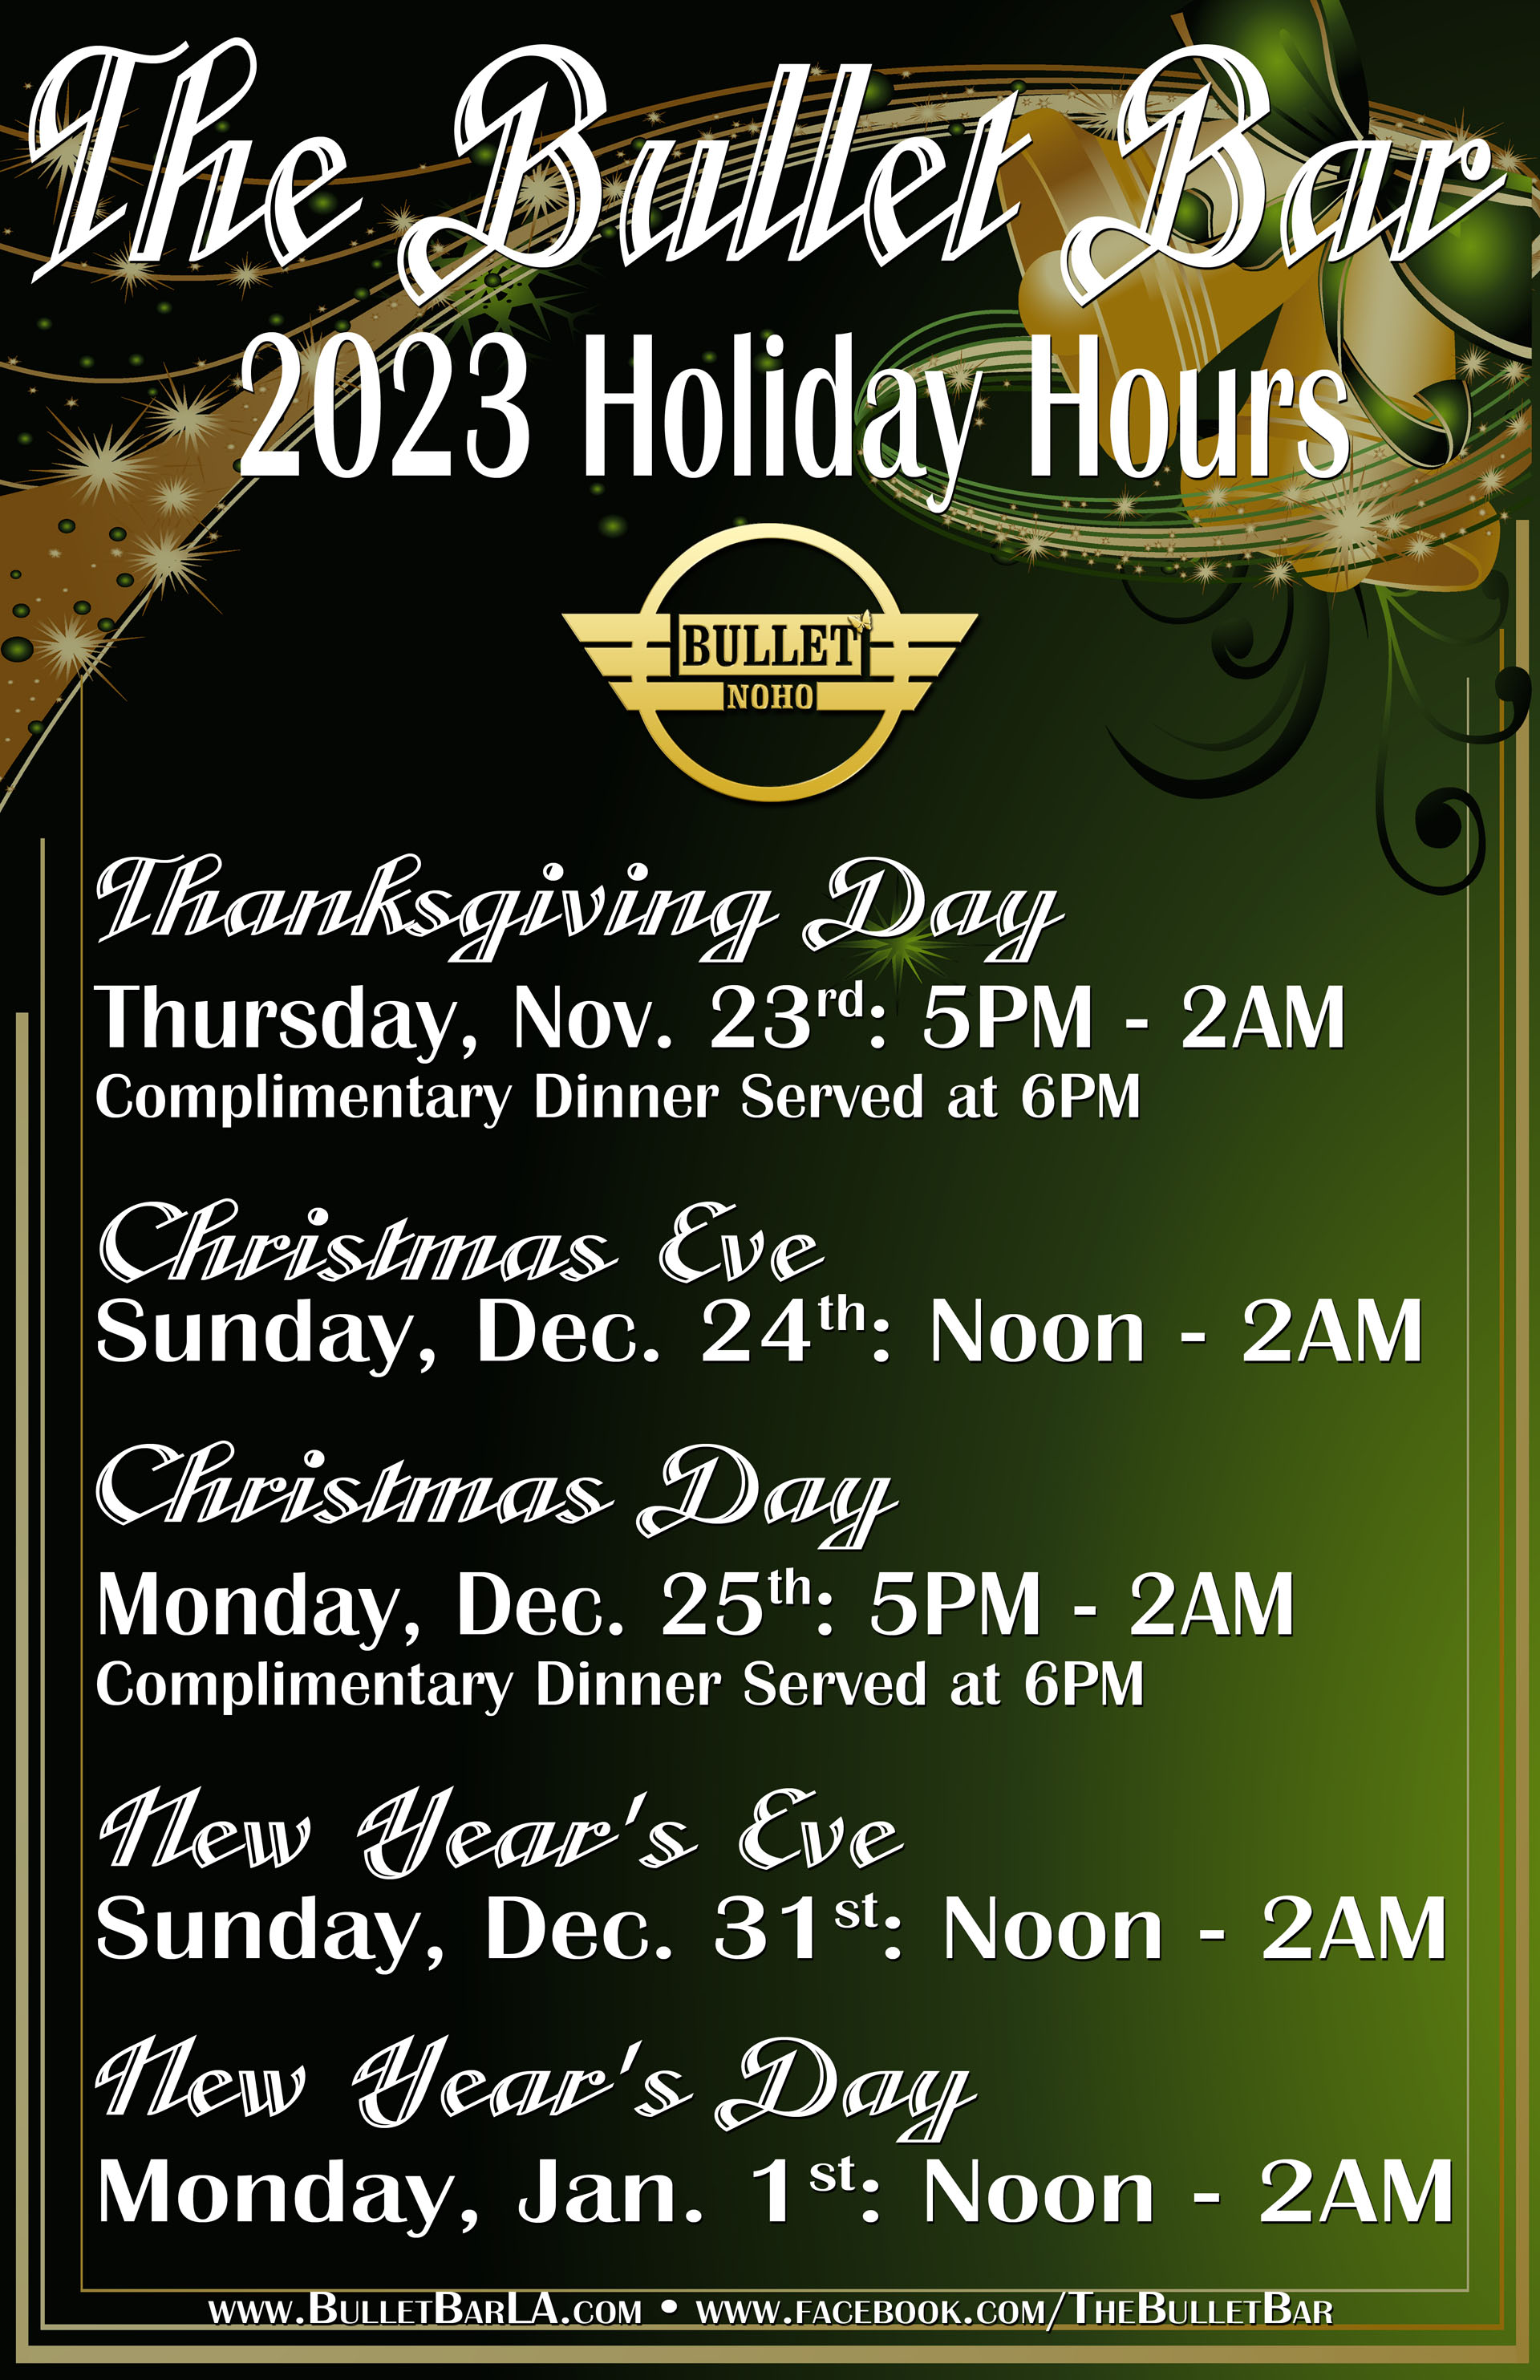 The Bullet Bar's Holiday Hours for 2023